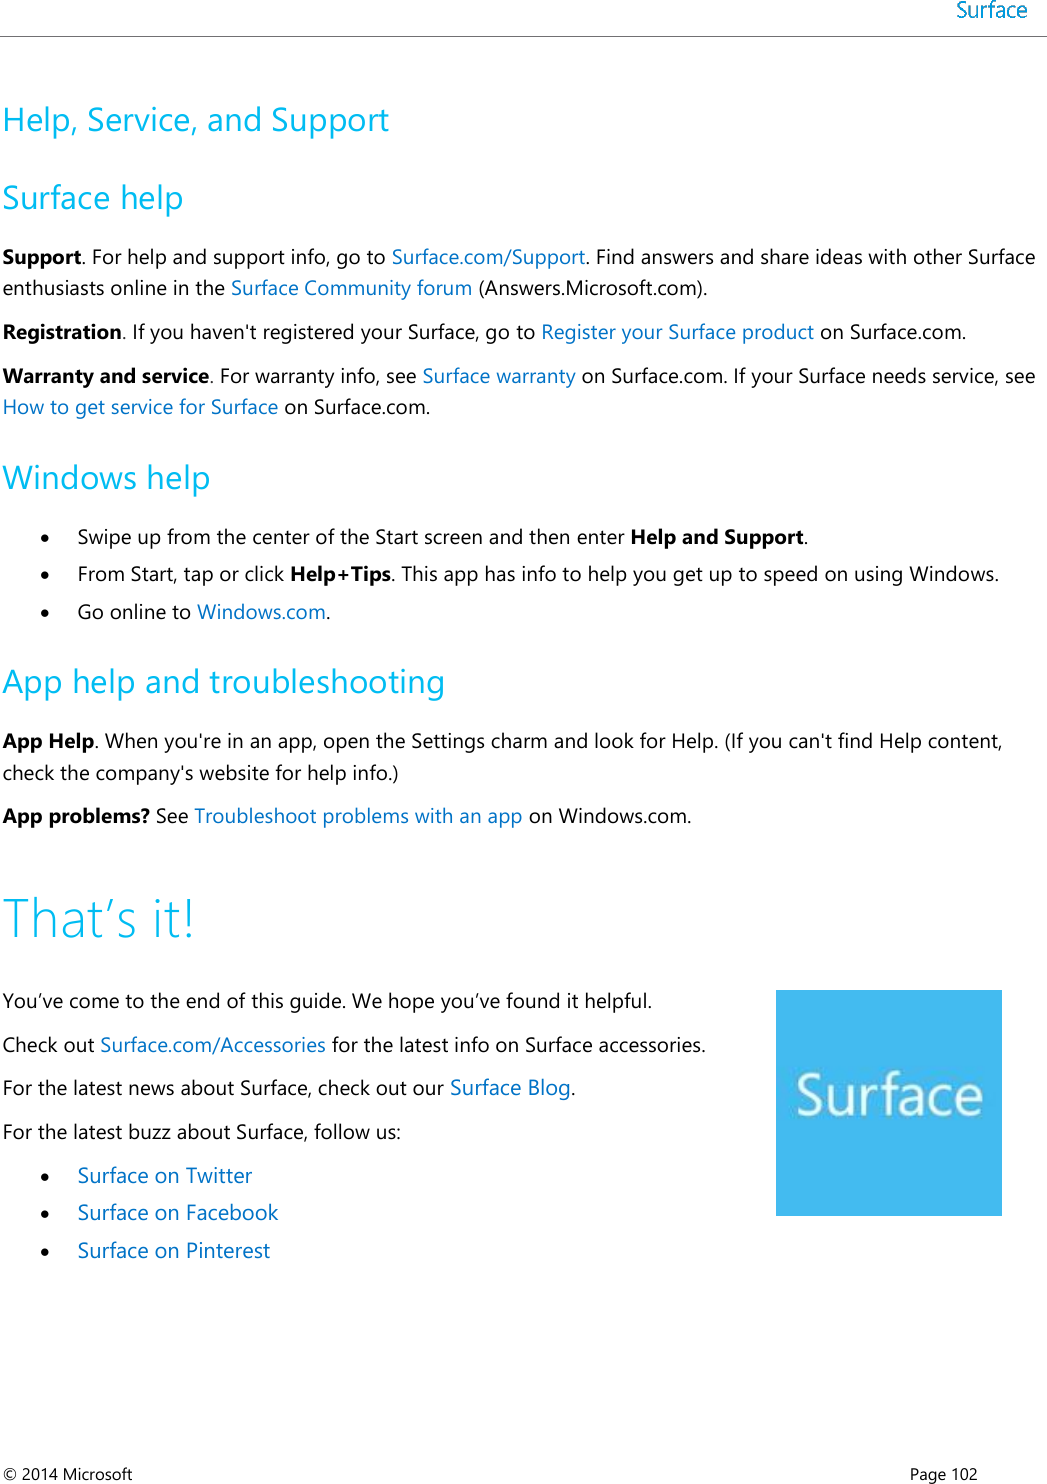  © 2014 Microsoft      Page 102  Help, Service, and Support Surface help Support. For help and support info, go to Surface.com/Support. Find answers and share ideas with other Surface enthusiasts online in the Surface Community forum (Answers.Microsoft.com). Registration. If you haven&apos;t registered your Surface, go to Register your Surface product on Surface.com.   Warranty and service. For warranty info, see Surface warranty on Surface.com. If your Surface needs service, see How to get service for Surface on Surface.com.  Windows help  Swipe up from the center of the Start screen and then enter Help and Support.  From Start, tap or click Help+Tips. This app has info to help you get up to speed on using Windows.  Go online to Windows.com. App help and troubleshooting App Help. When you&apos;re in an app, open the Settings charm and look for Help. (If you can&apos;t find Help content, check the company&apos;s website for help info.)  App problems? See Troubleshoot problems with an app on Windows.com. That’s it! You’ve come to the end of this guide. We hope you’ve found it helpful. Check out Surface.com/Accessories for the latest info on Surface accessories. For the latest news about Surface, check out our Surface Blog. For the latest buzz about Surface, follow us:   Surface on Twitter   Surface on Facebook   Surface on Pinterest  